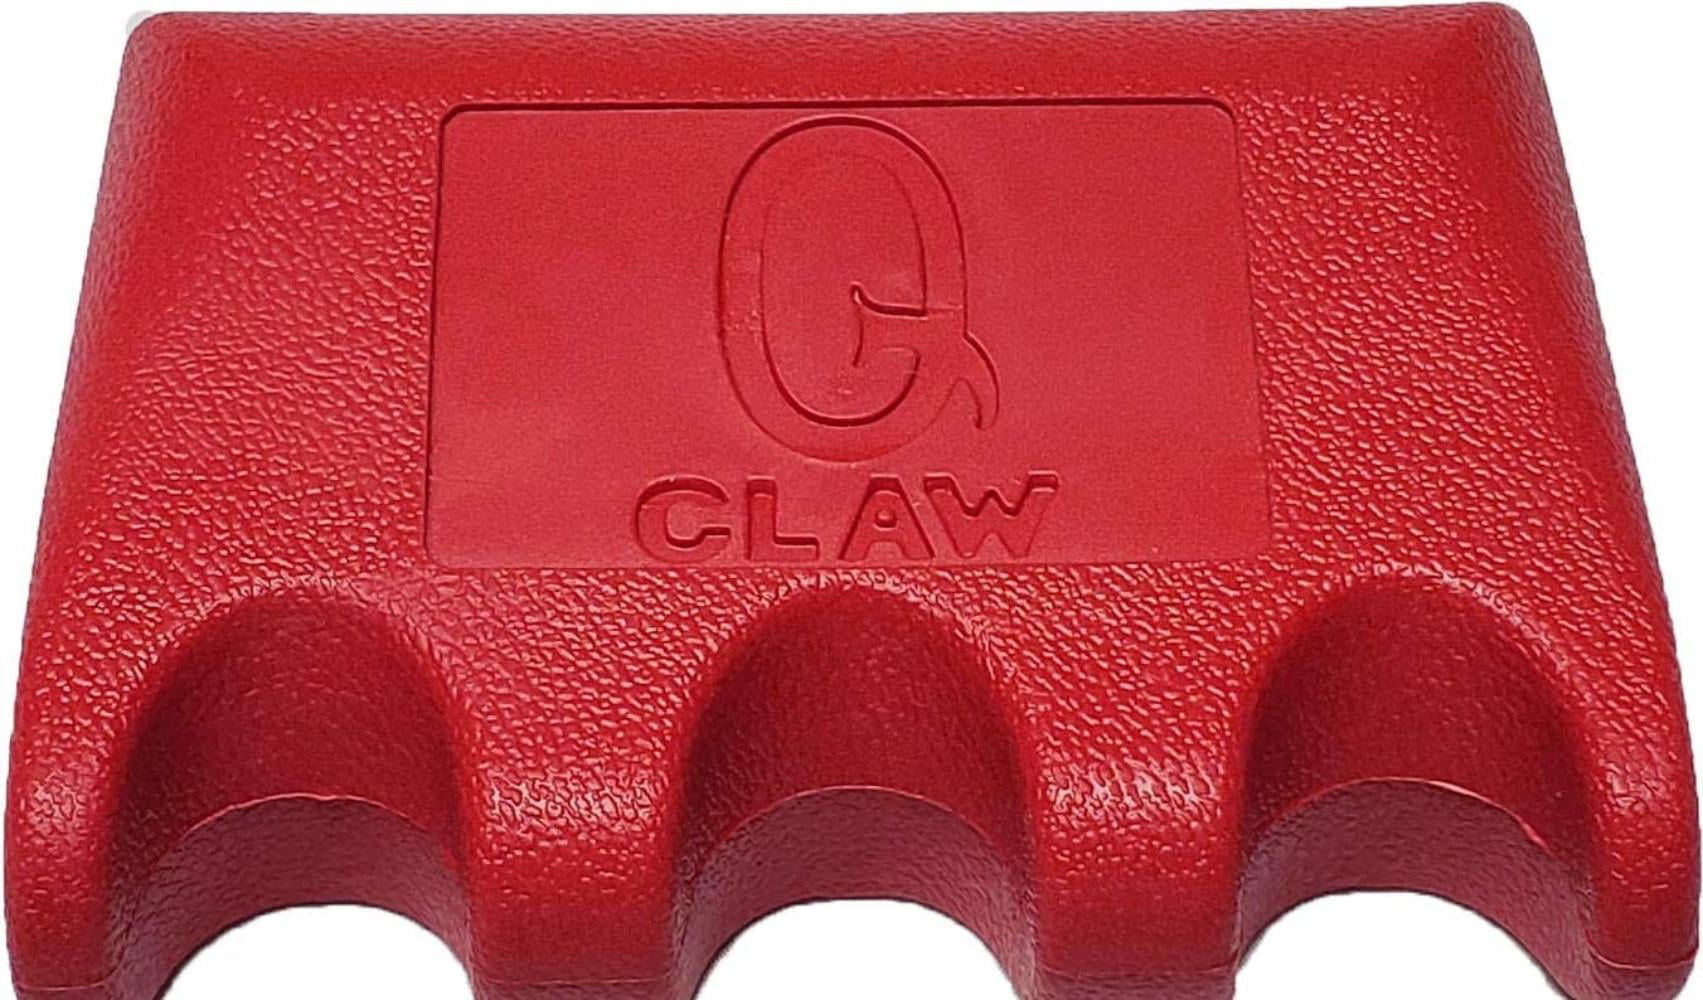 Red Q-Claw QCLAW Portable Pool/Billiards Cue Stick Holder/Rack 3 Place 